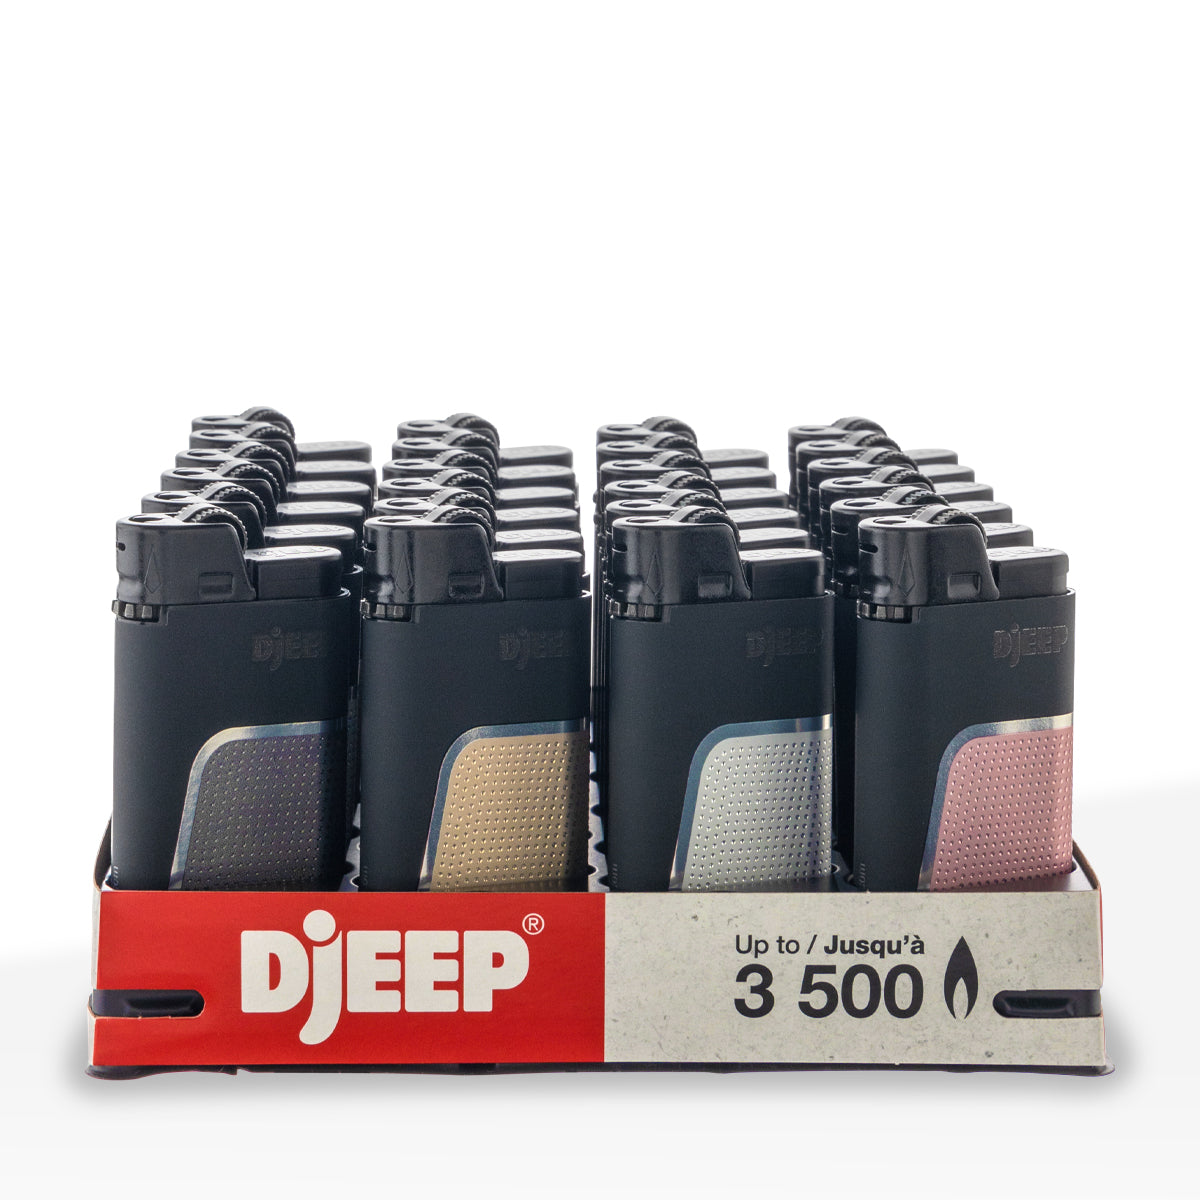 DJEEP Lighters | 'Retail Display' Bold | 24 Count Lighters DJEEP   